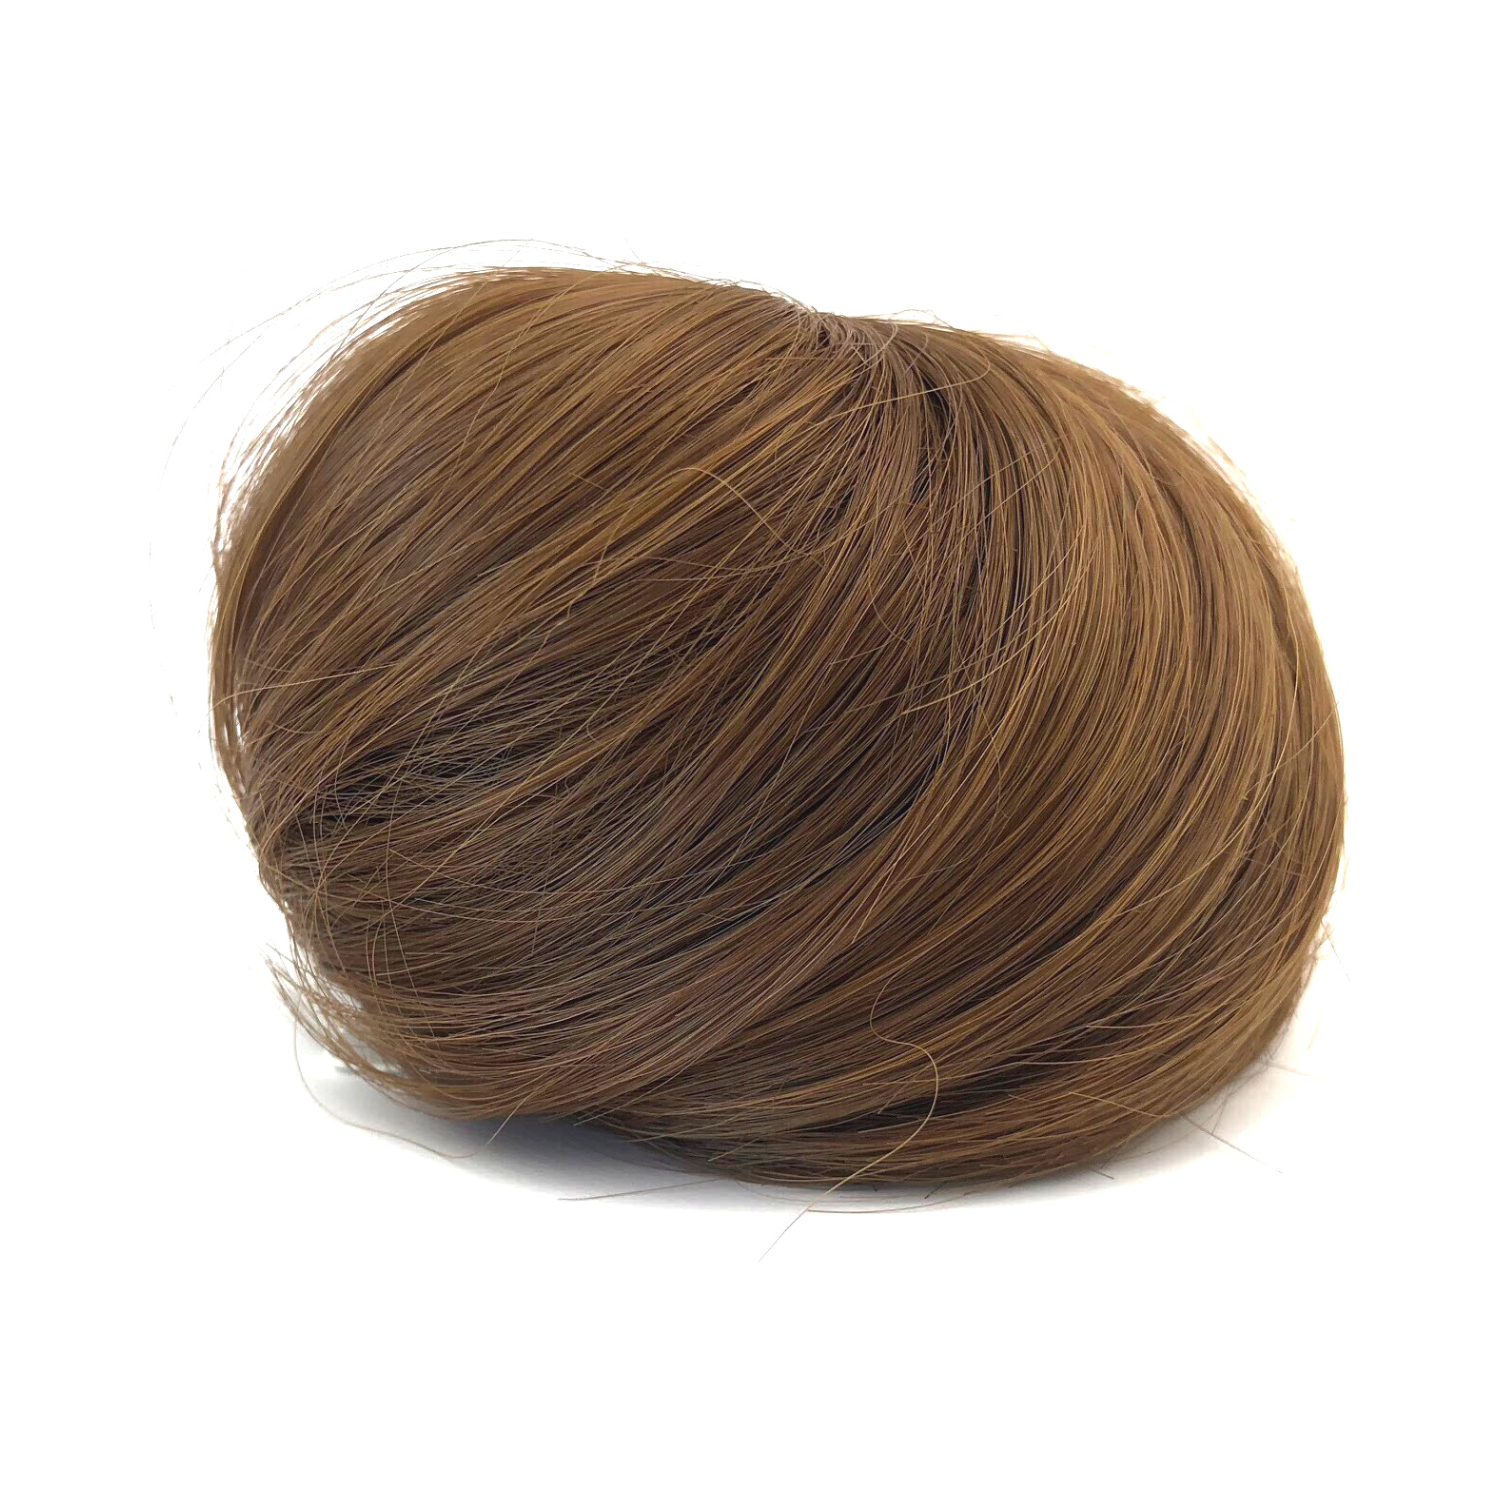 image of hair rehab london clip on bun hairpiece in shade natural